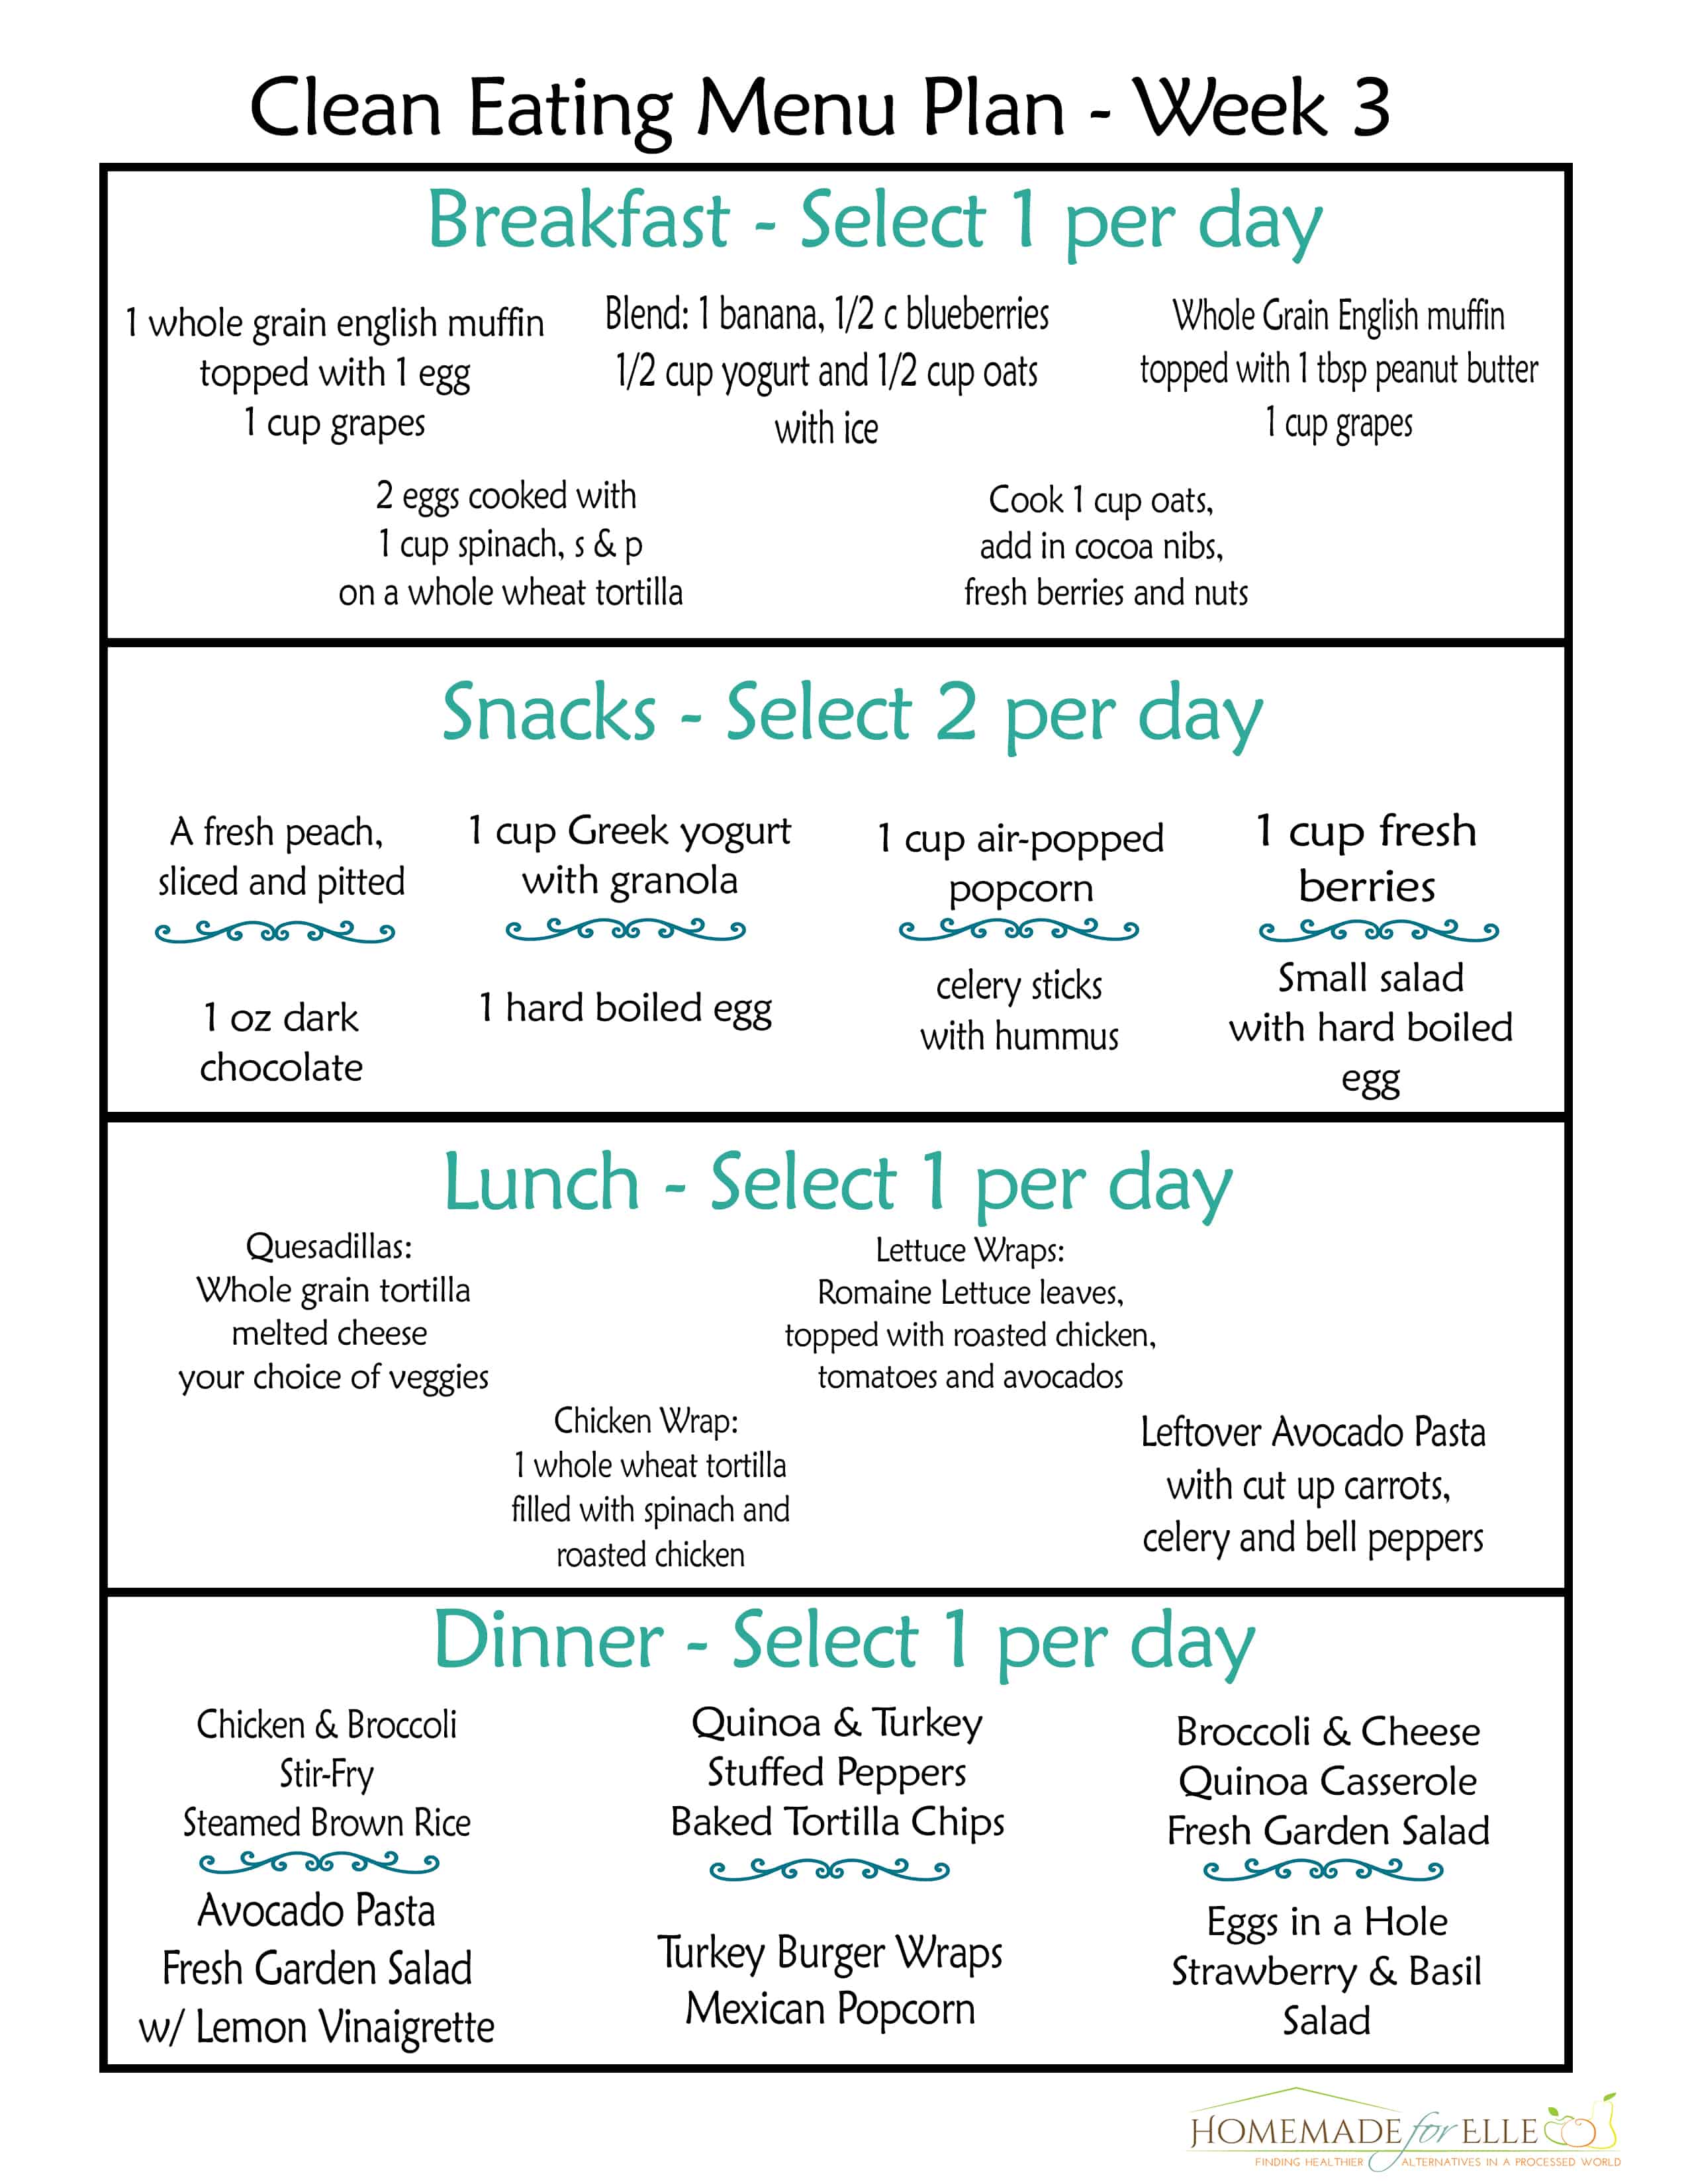 Clean Eating Meal Plan PDF With Recipes Your Family Will Love  ⋆ Homemade For Elle